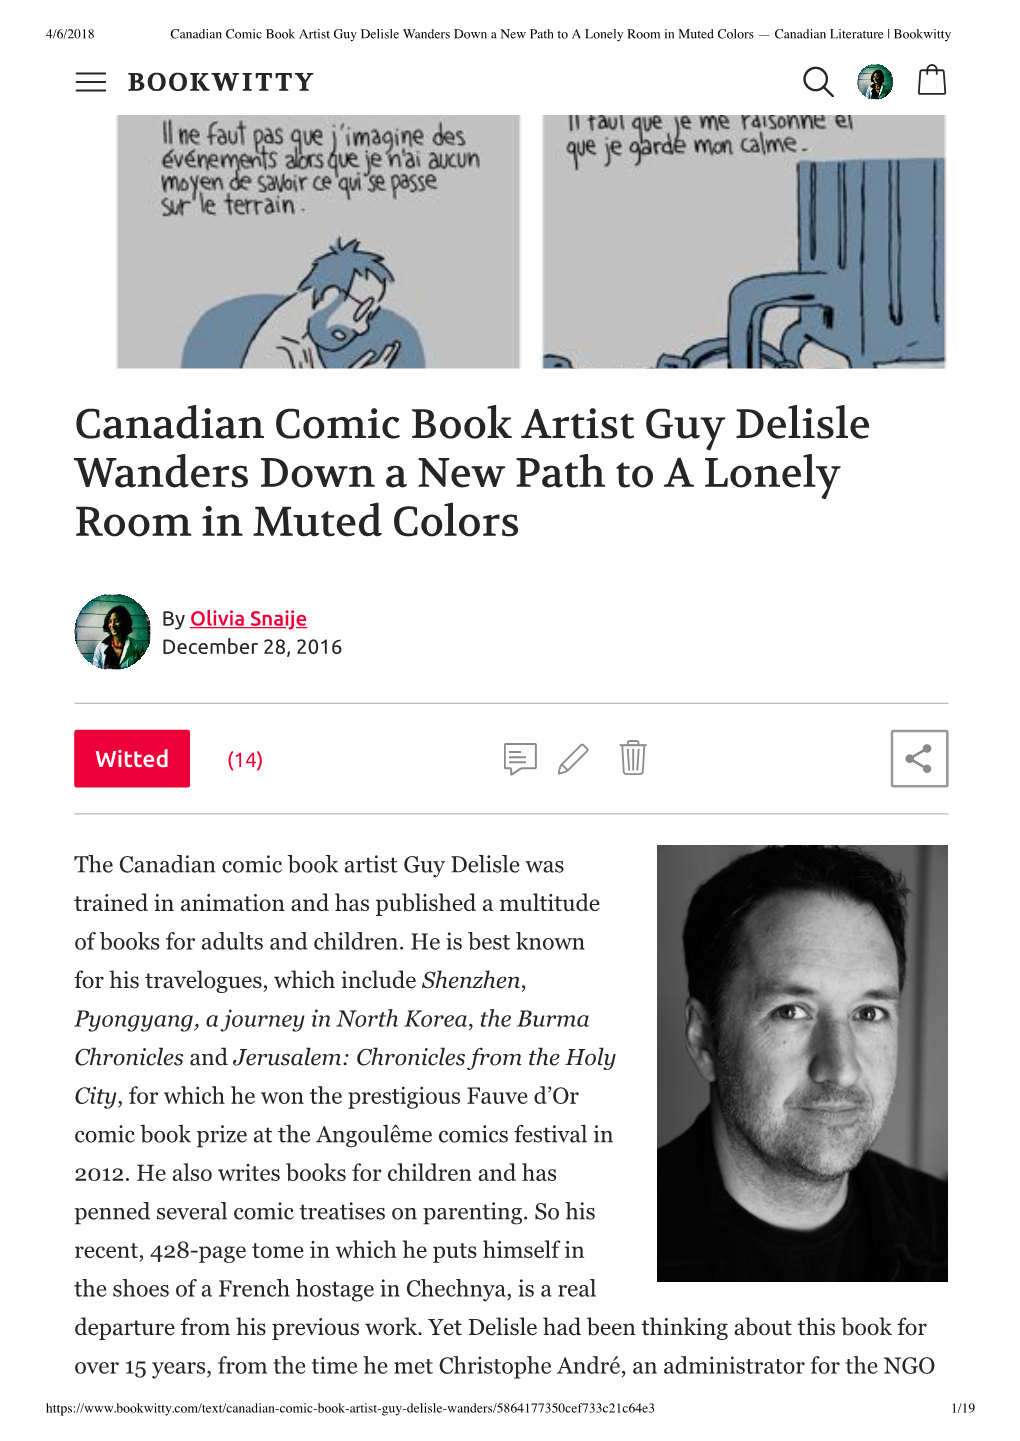 Canadian Comic Book Artist Guy Delisle Wanders Down a New Path to a Lonely Room in Muted Colors — Canadian Literature | Bookwitty